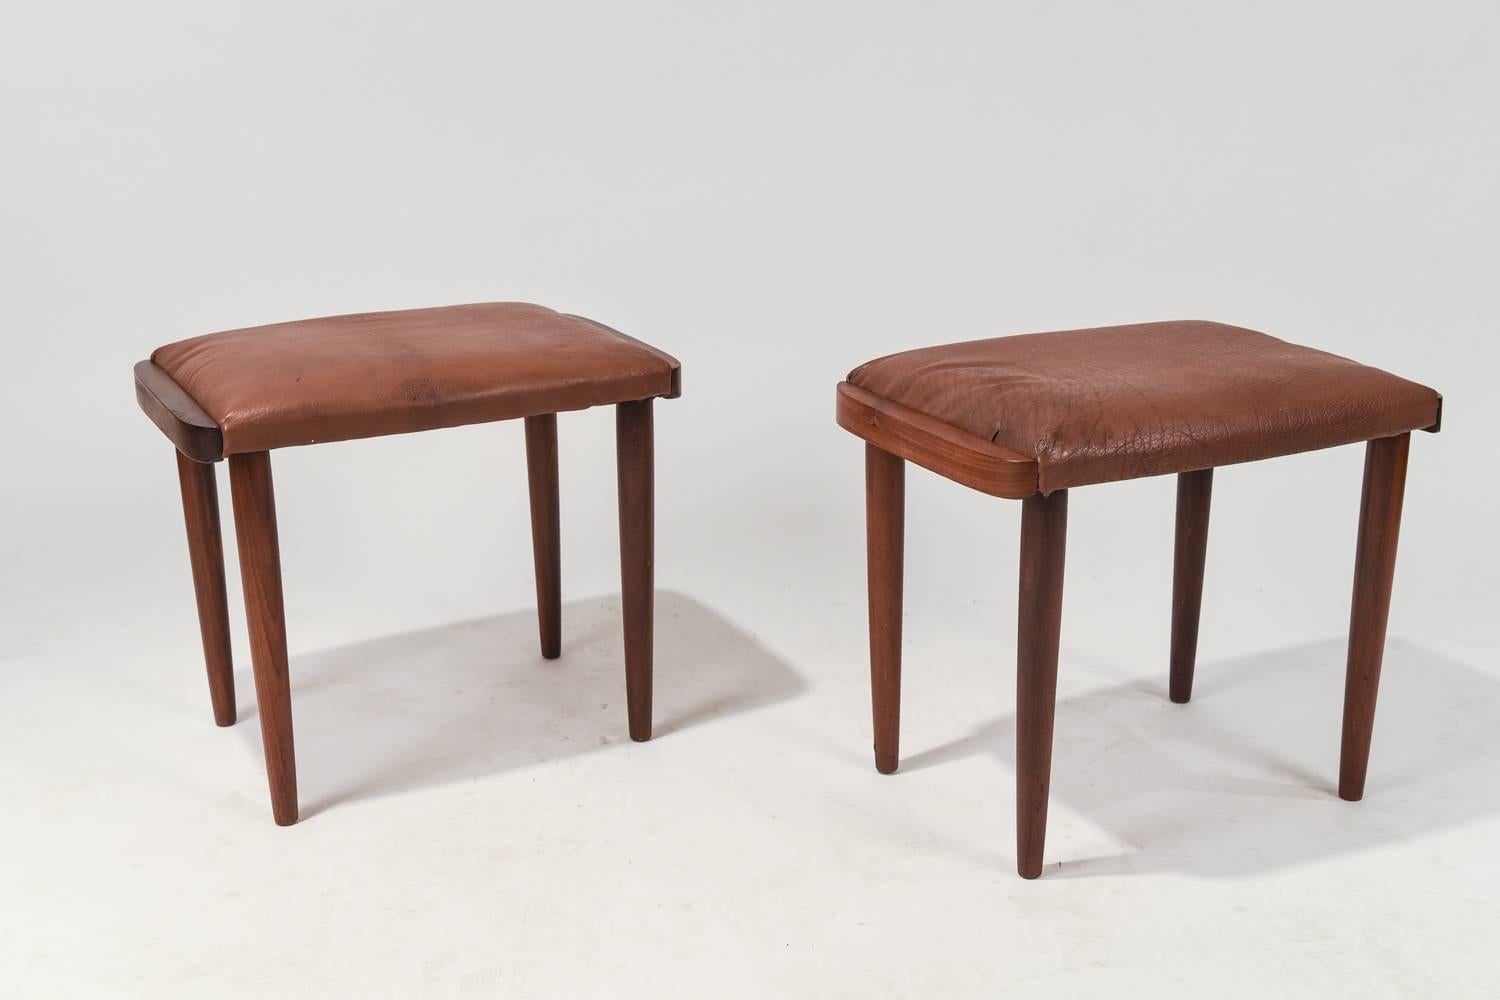 A stunning pair of Danish Mid-Century stools made of teak and upholstered with leather. Provides great extra seating.